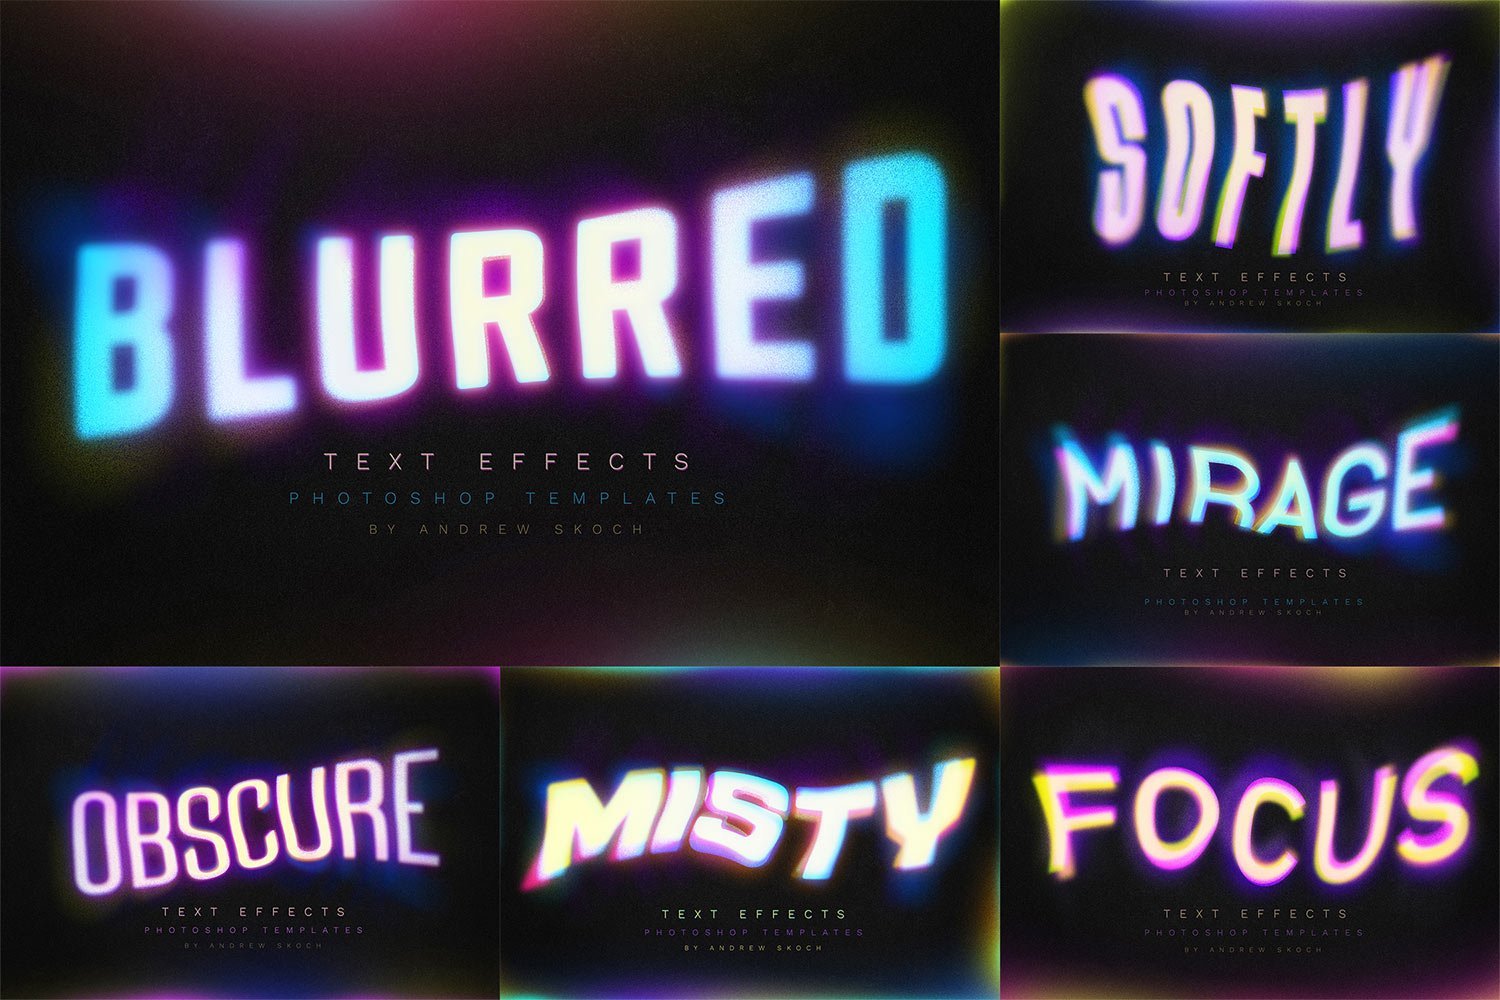 Gradient Blurred Text Effects